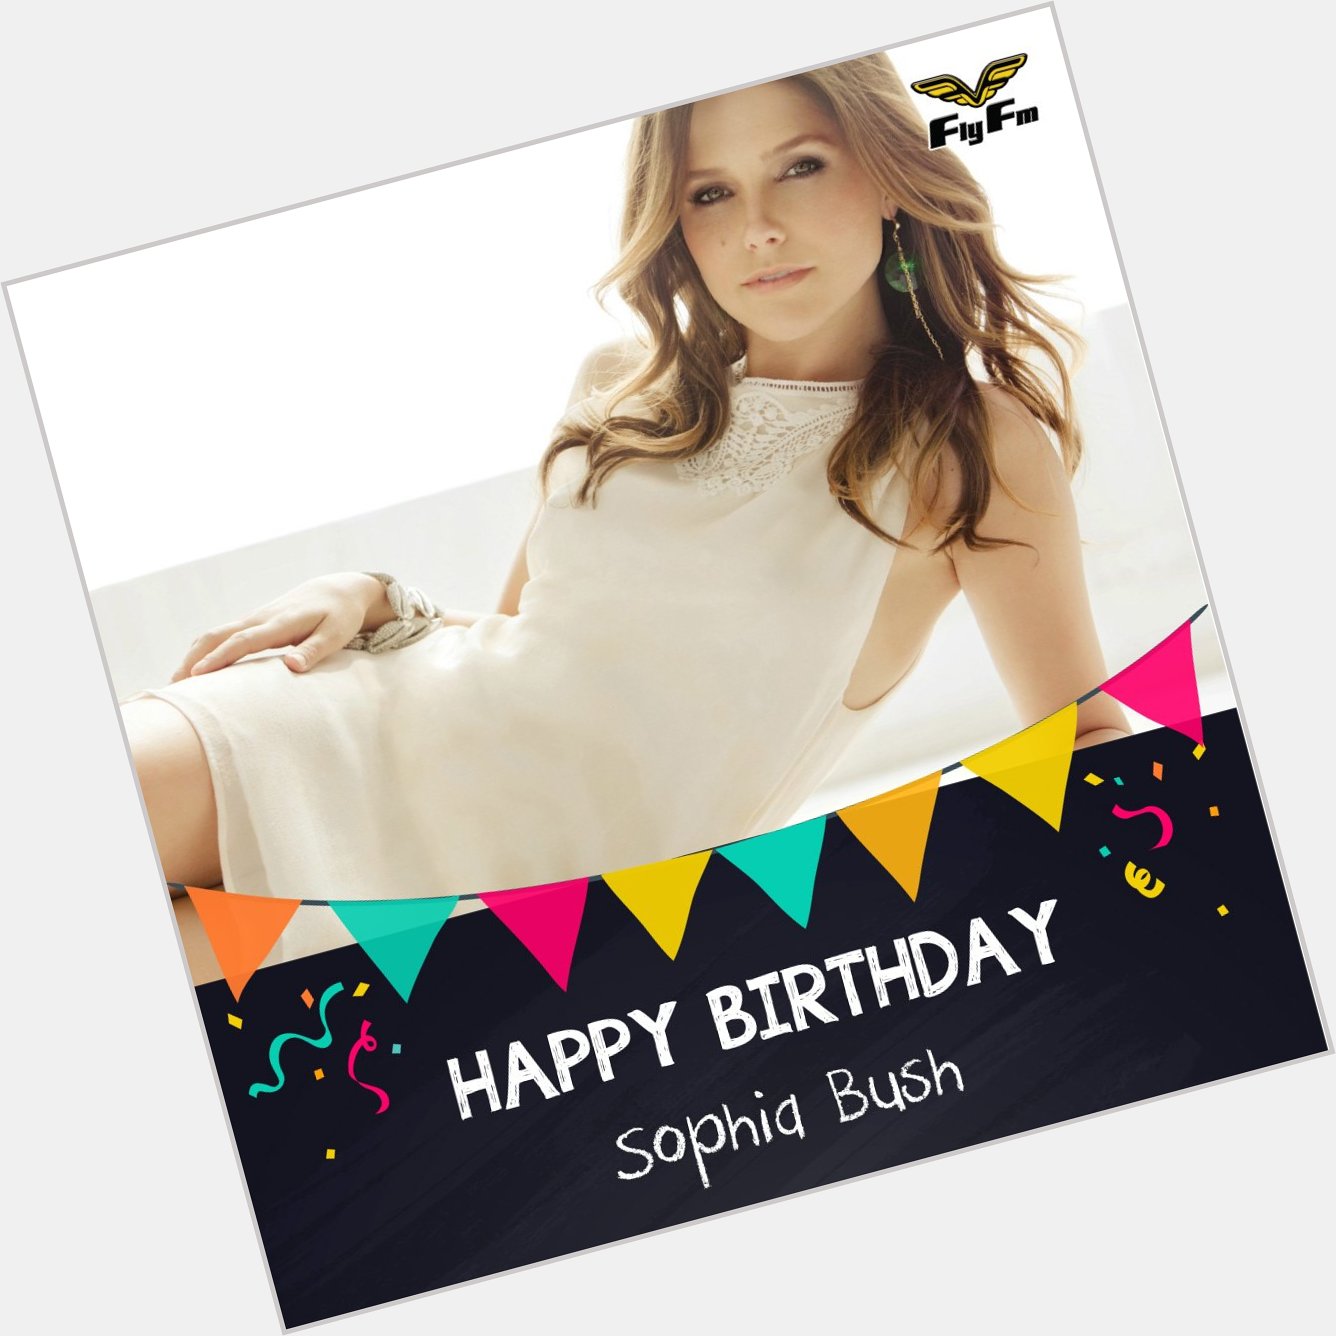 Sophia Bush is turning 35 today and we don\t wanna be the last ones to wish her! HAPPY BIRTHDAY SOPHIA! 